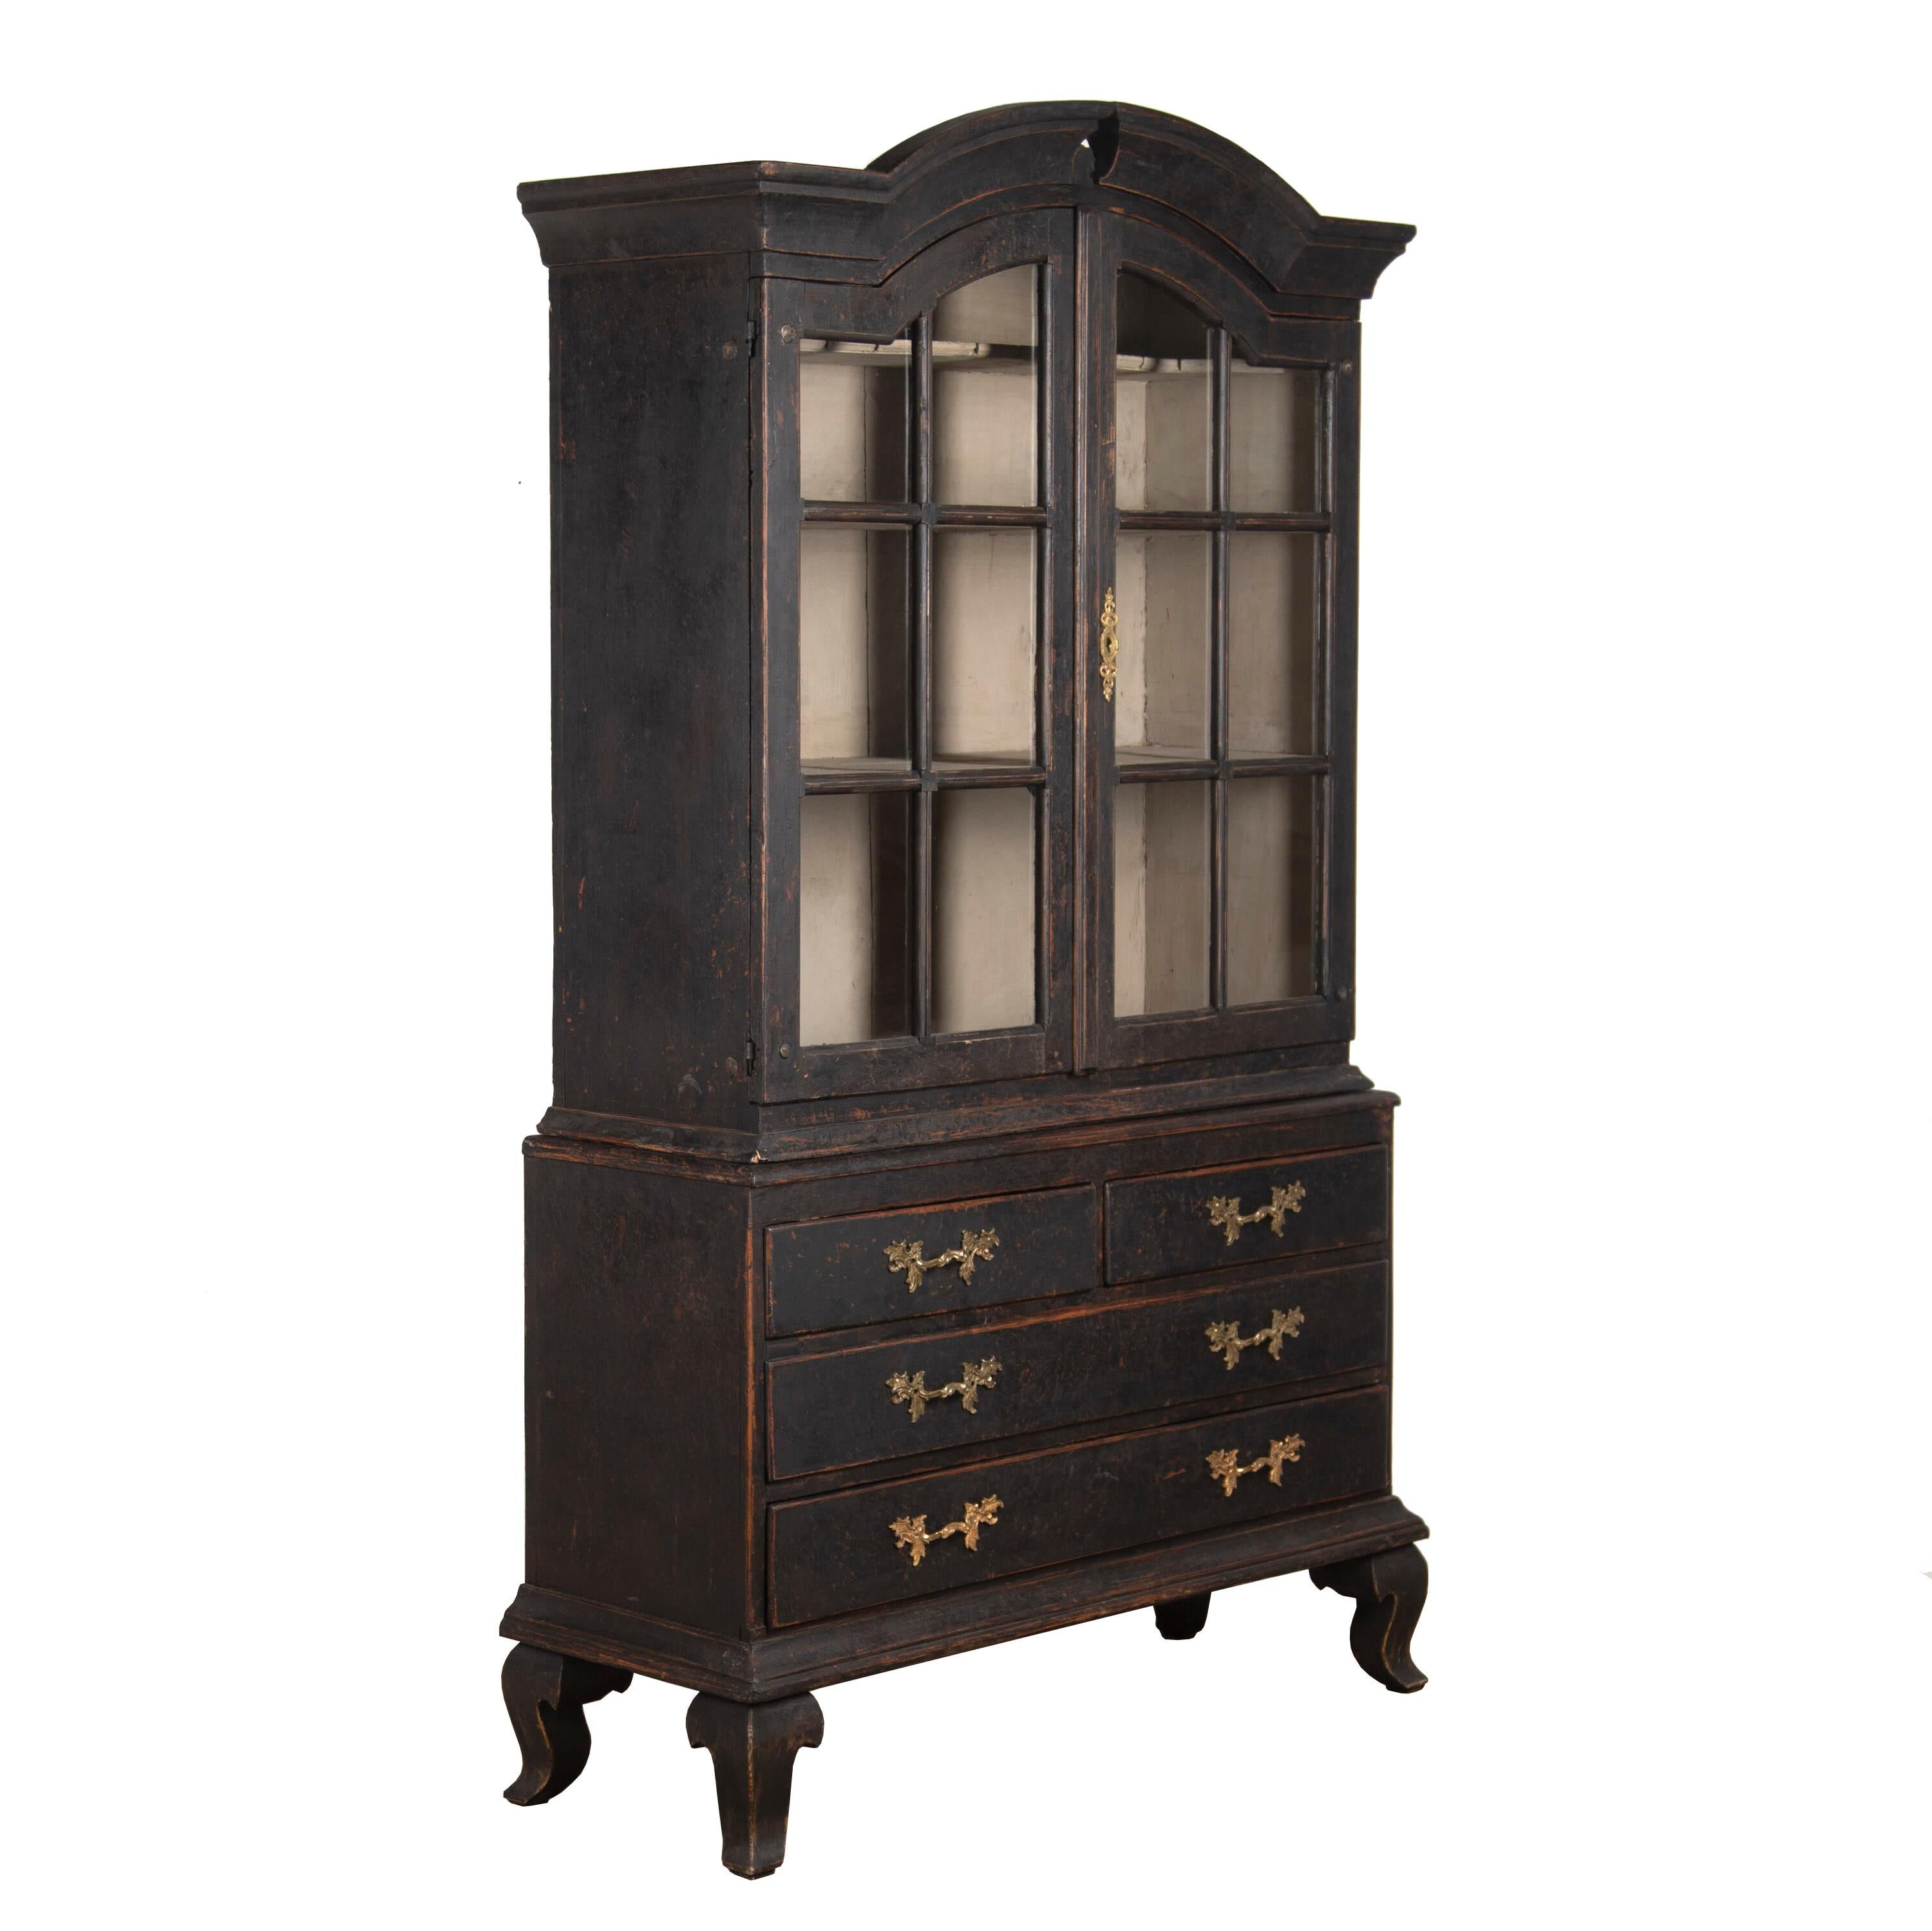 Swedish 19th century vitrine with a decorative carved wooden pediment and tapering to cabriolet legs. Glazed doors with original glass open to display shelves, and below are two short and two long drawers. This piece has been repainted in black,